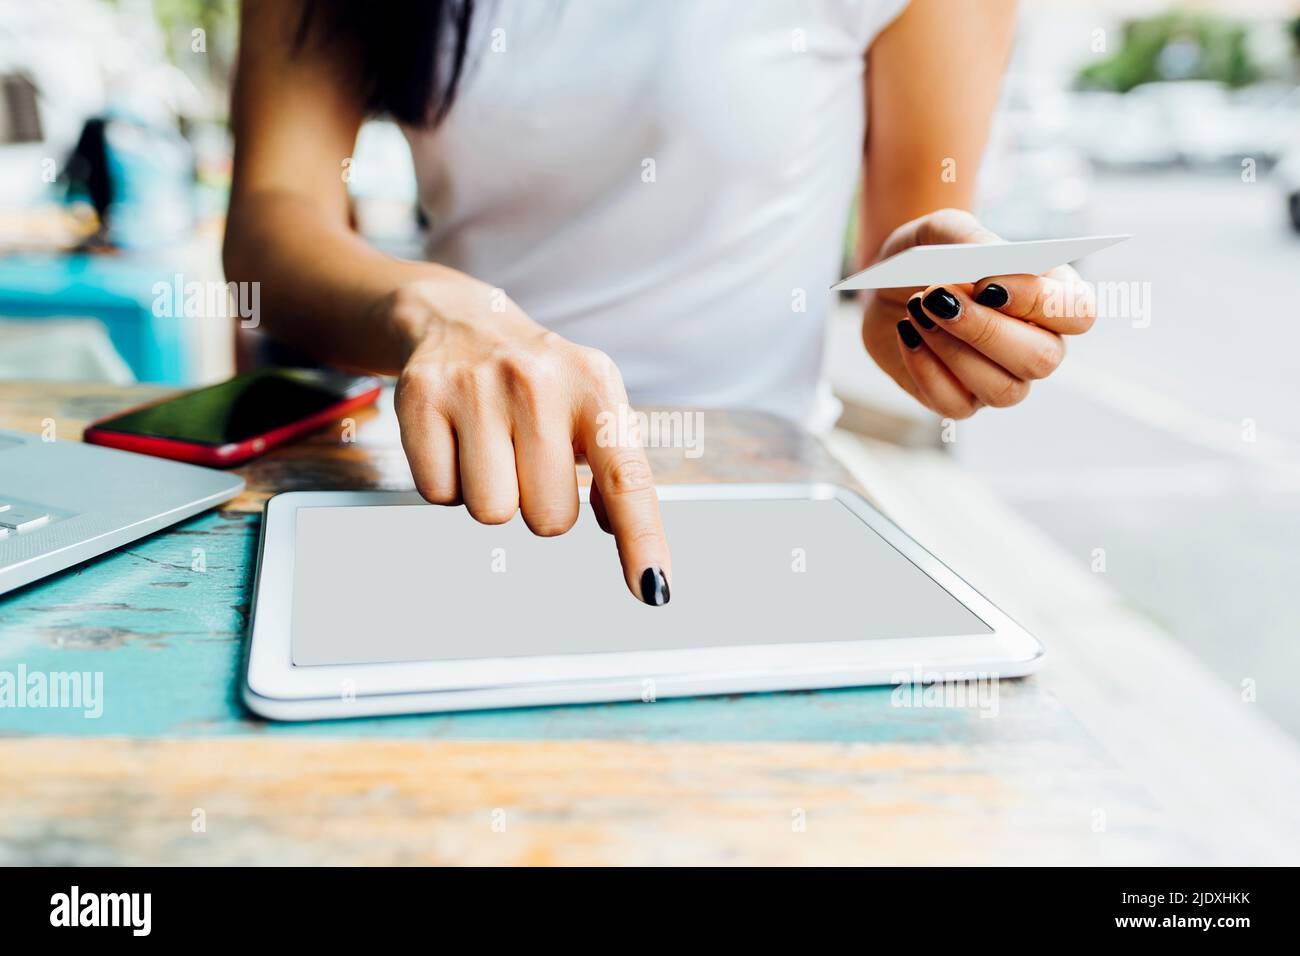 Hands of woman holding credit card making online payment through tablet PC at sidewalk cafe Stock Photo